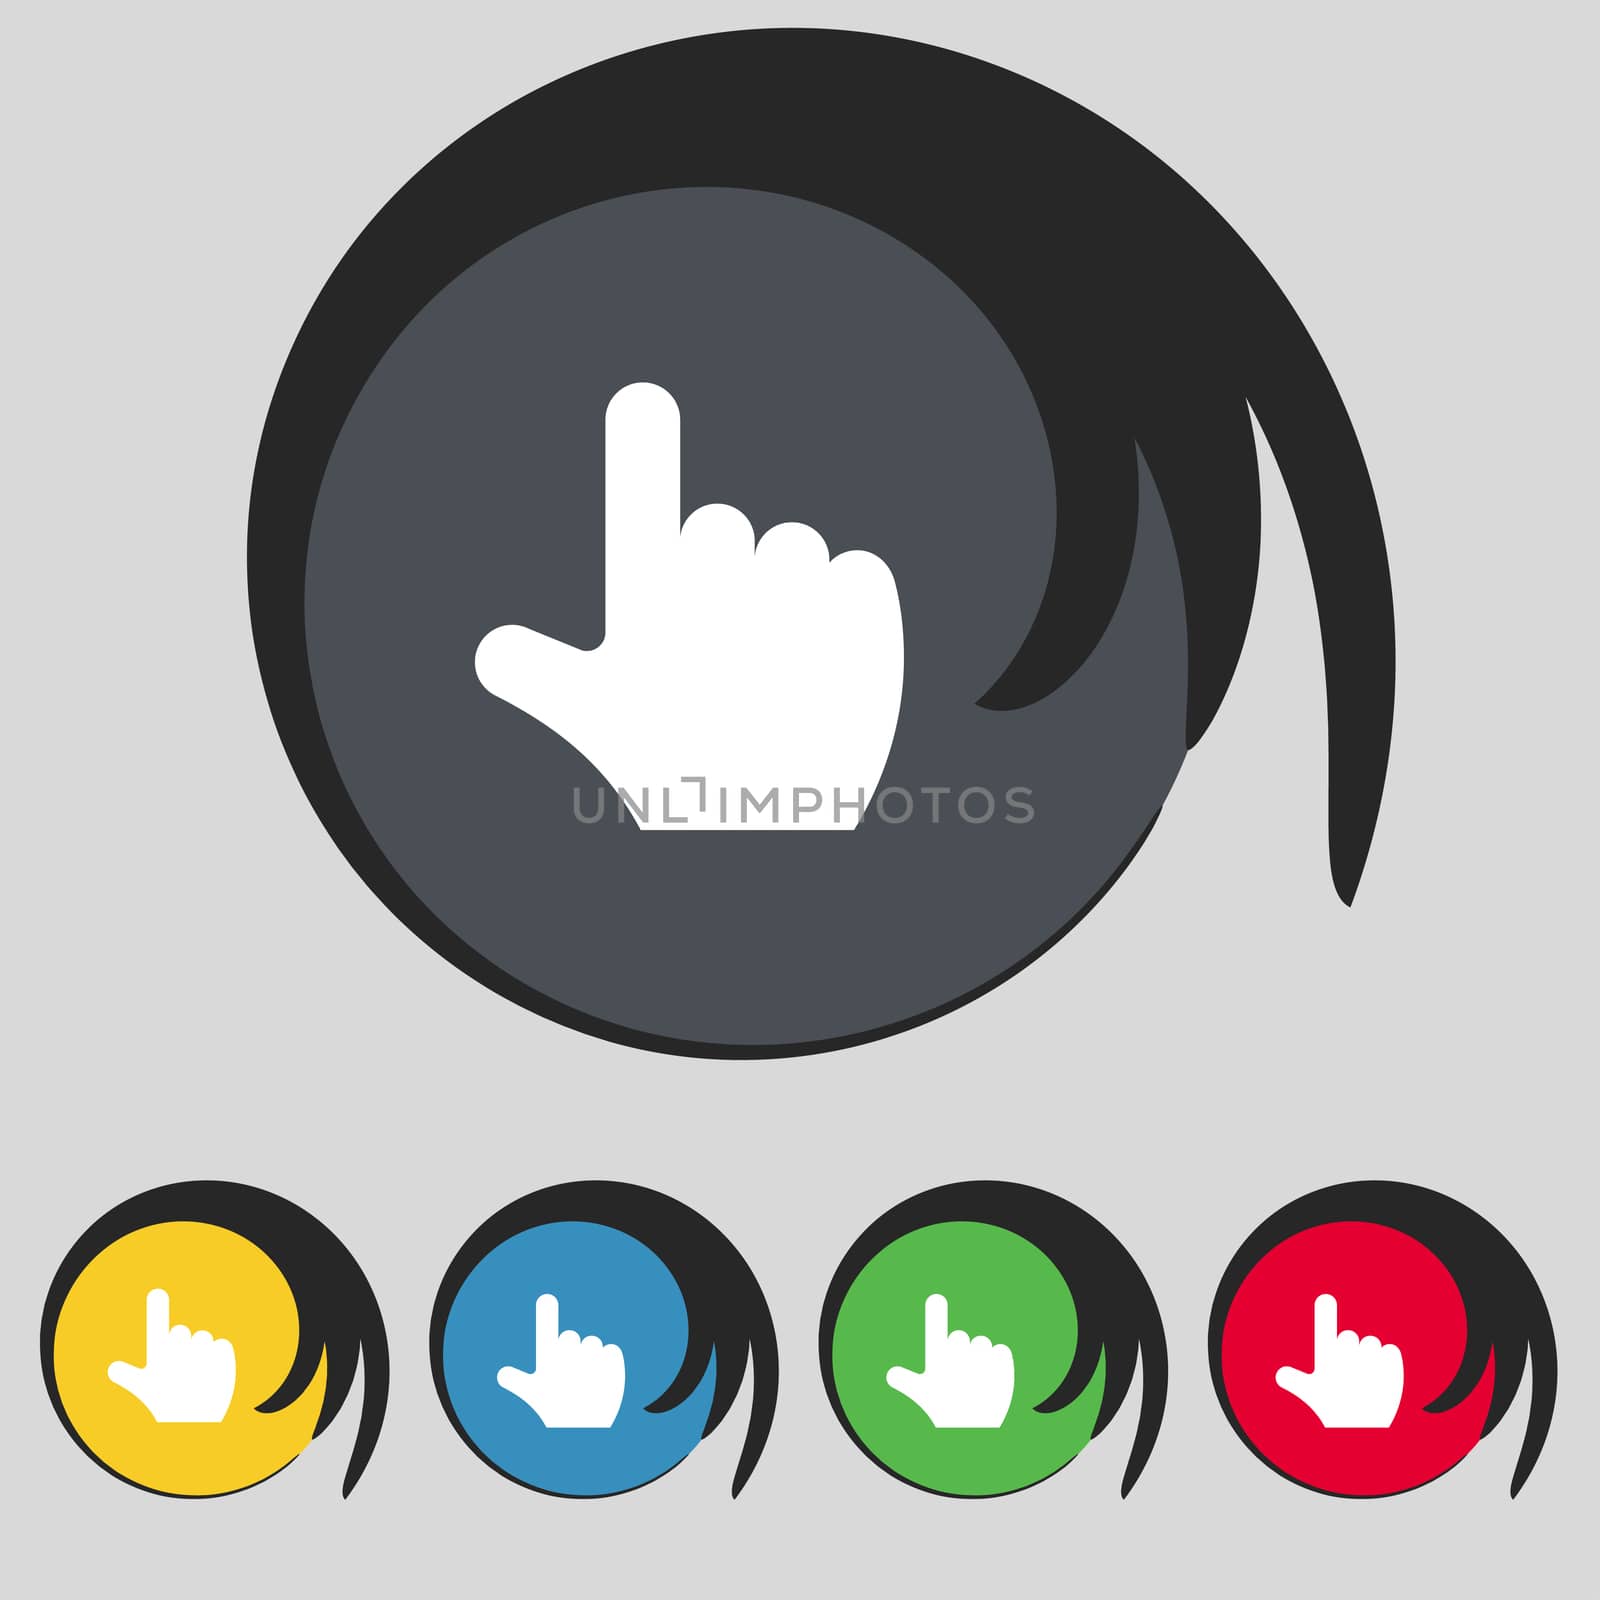 pointing hand icon sign. Symbol on five colored buttons. illustration